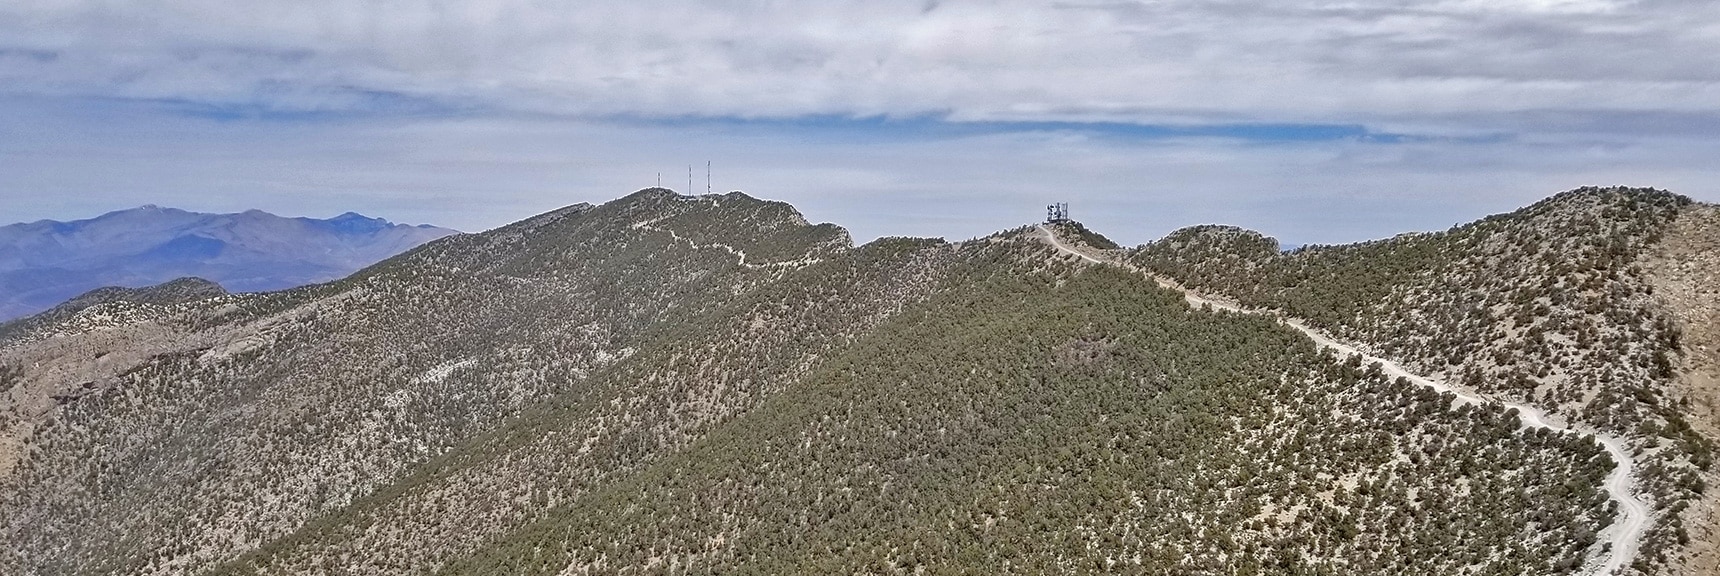 Mid Summit, North Summit and Access Road Viewed from the South Summit | Potosi Mountain Spring Mountains Nevada